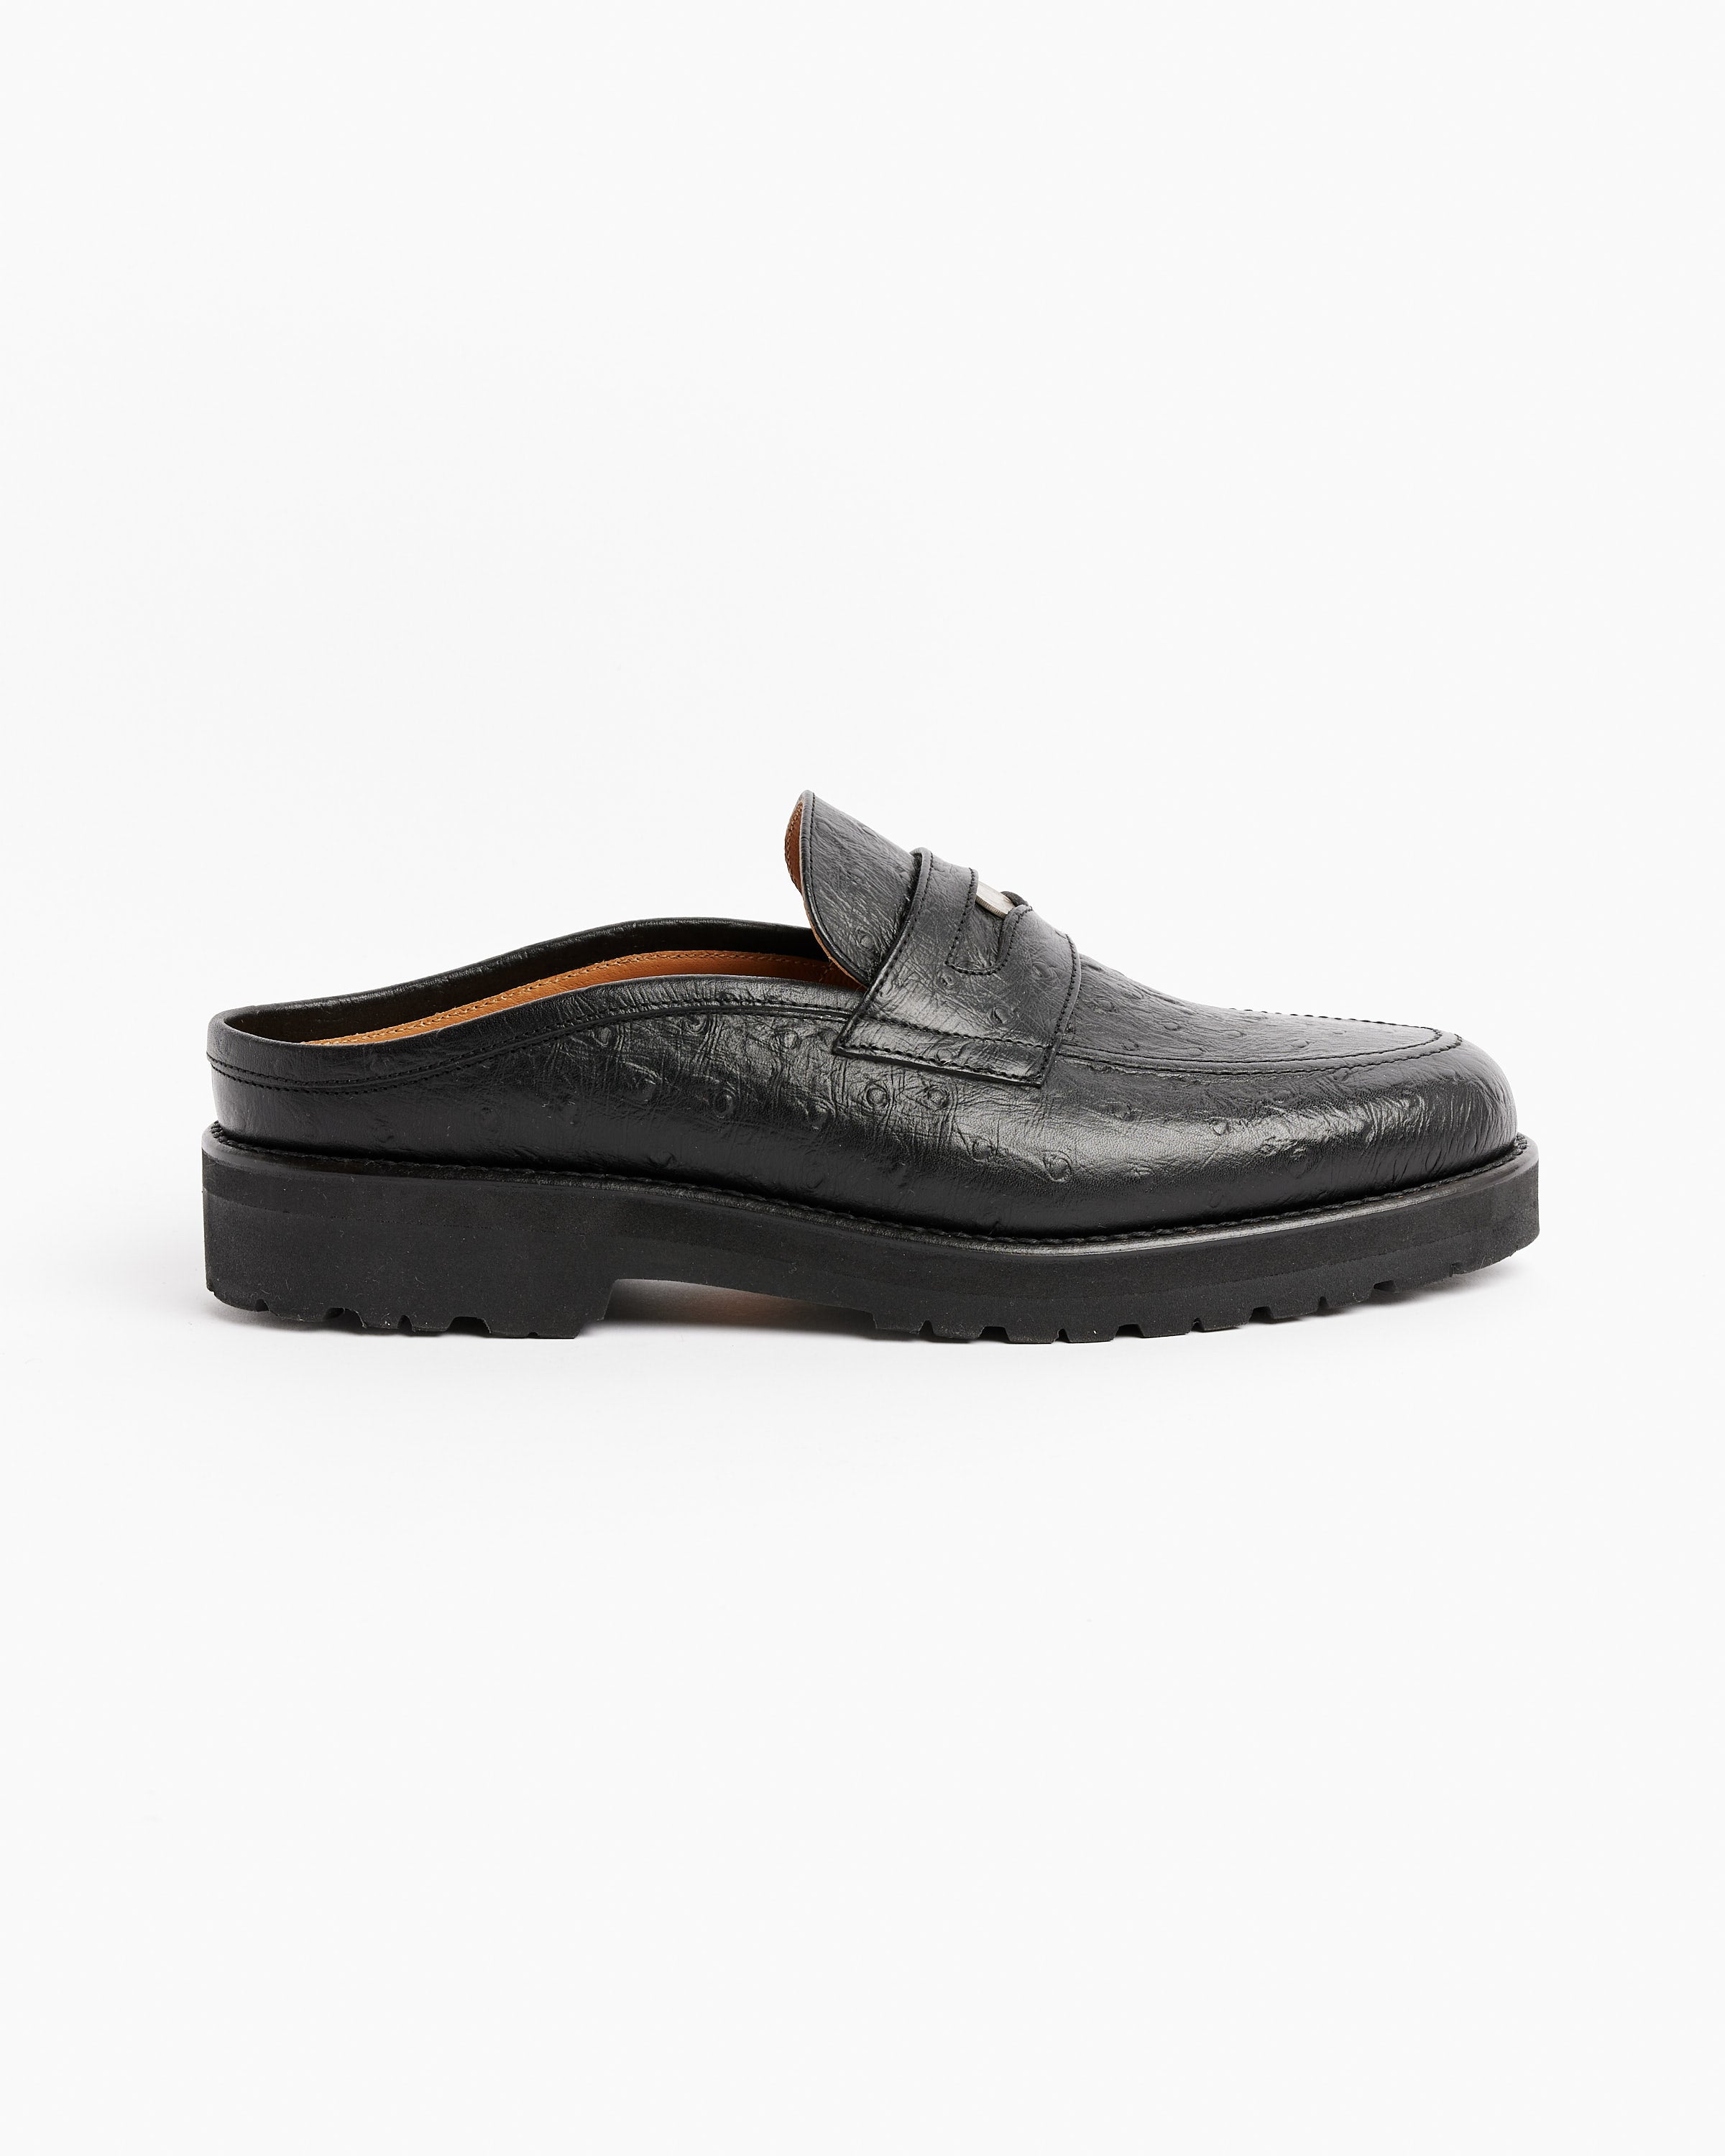 Coin Loafer Mule in Black